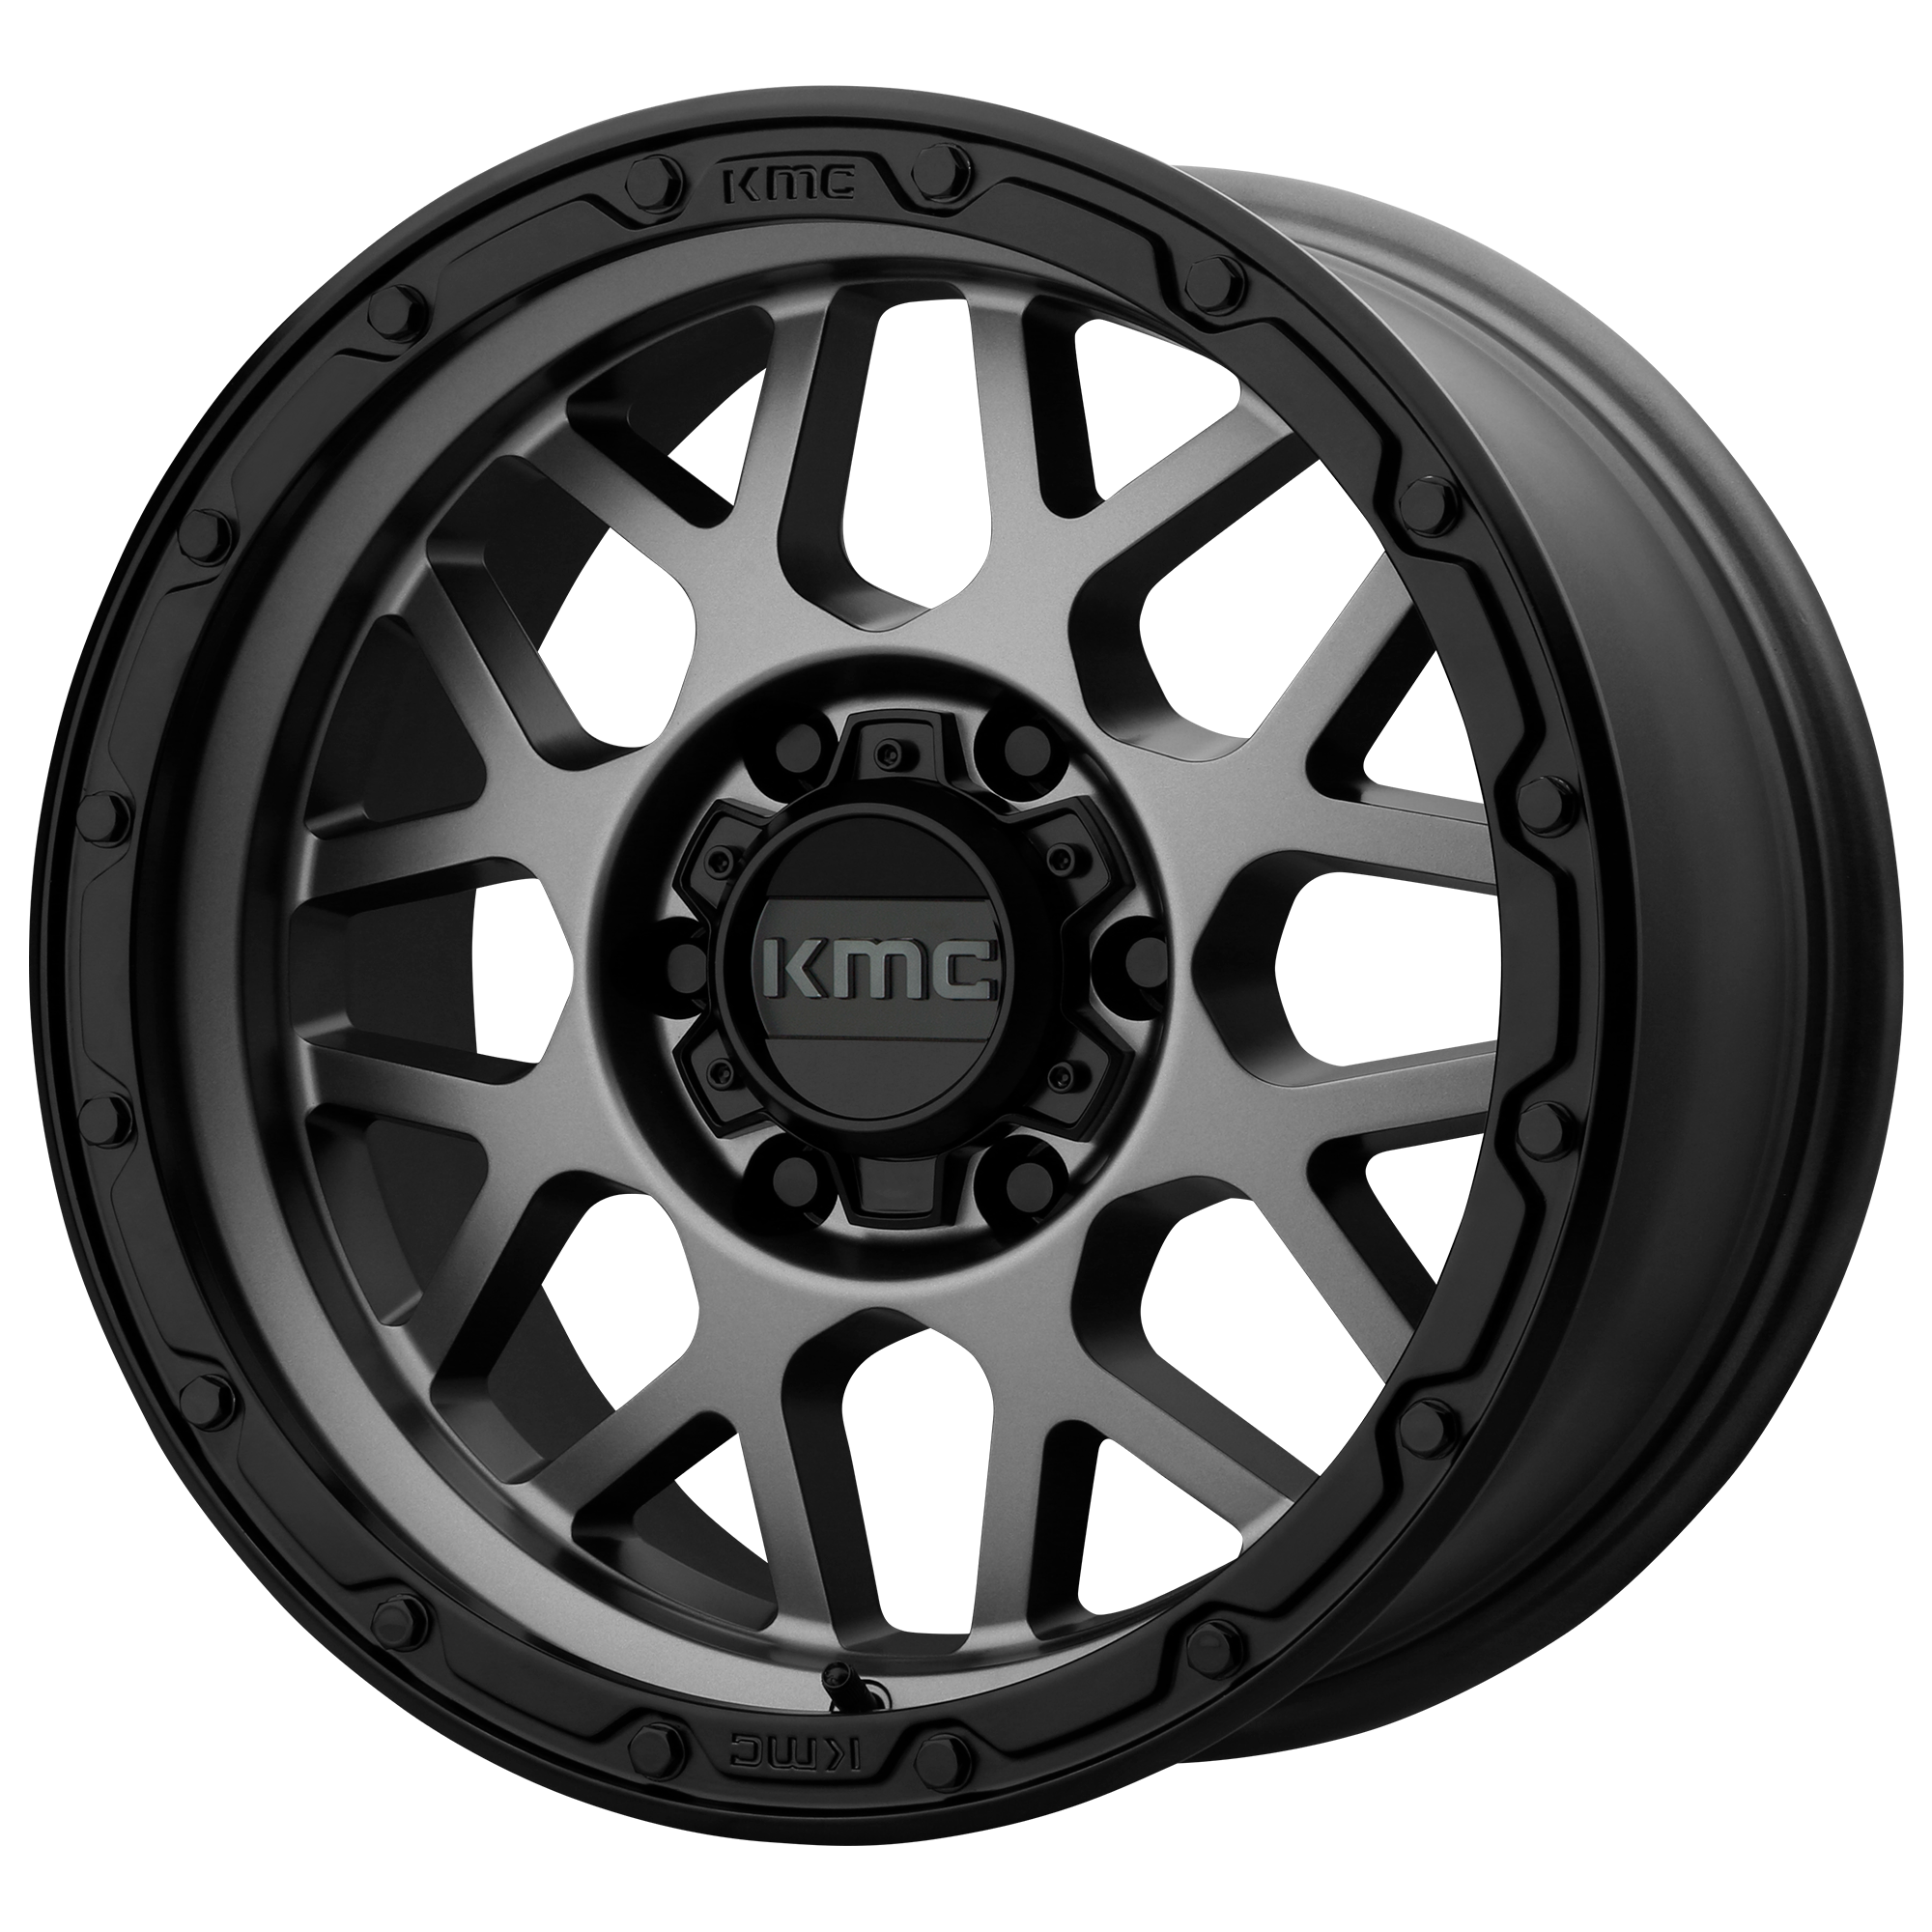 GRENADE OFF-ROAD 17x9 6x120.00 MATTE GRAY W/ MATTE BLACK LIP (18 mm) - Tires and Engine Performance